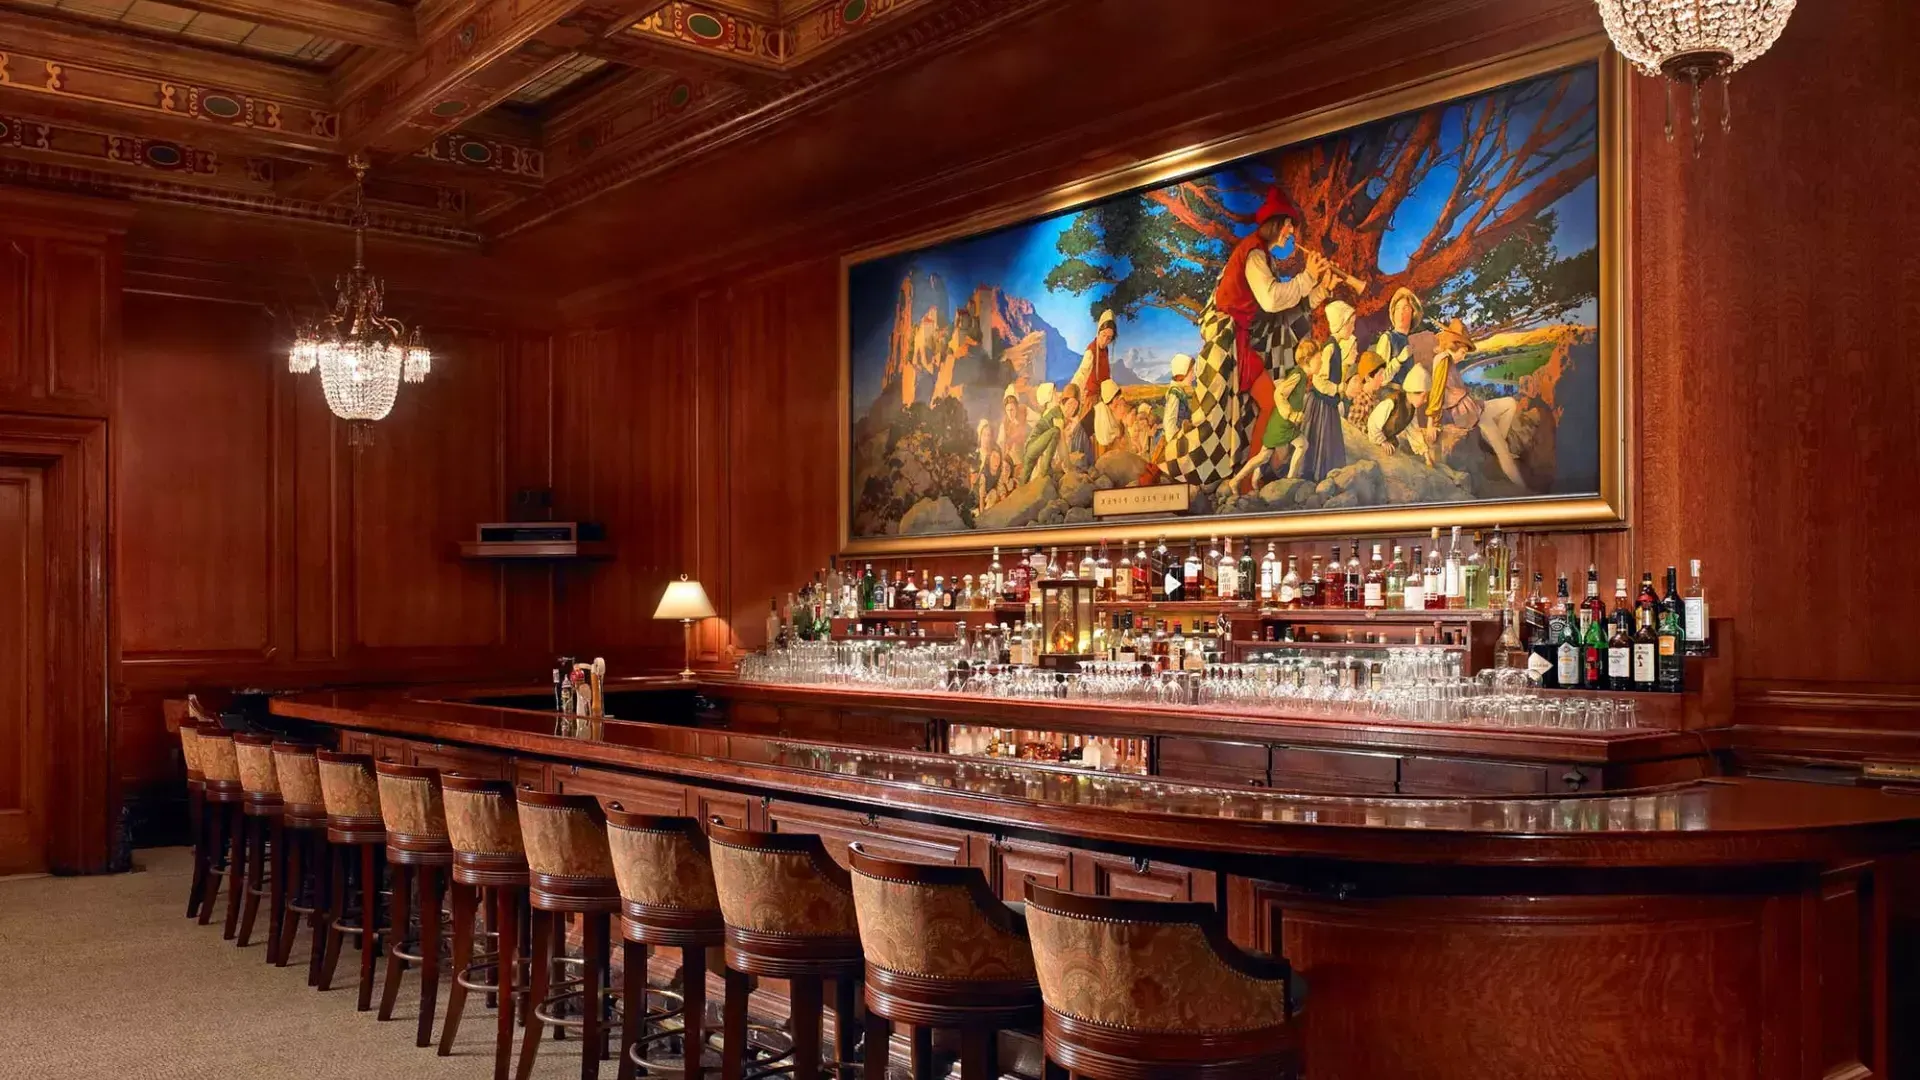 The bar at the Palace Hotel, which features wood-paneled walls and a painting titled The Pied Piper of Hamelin.